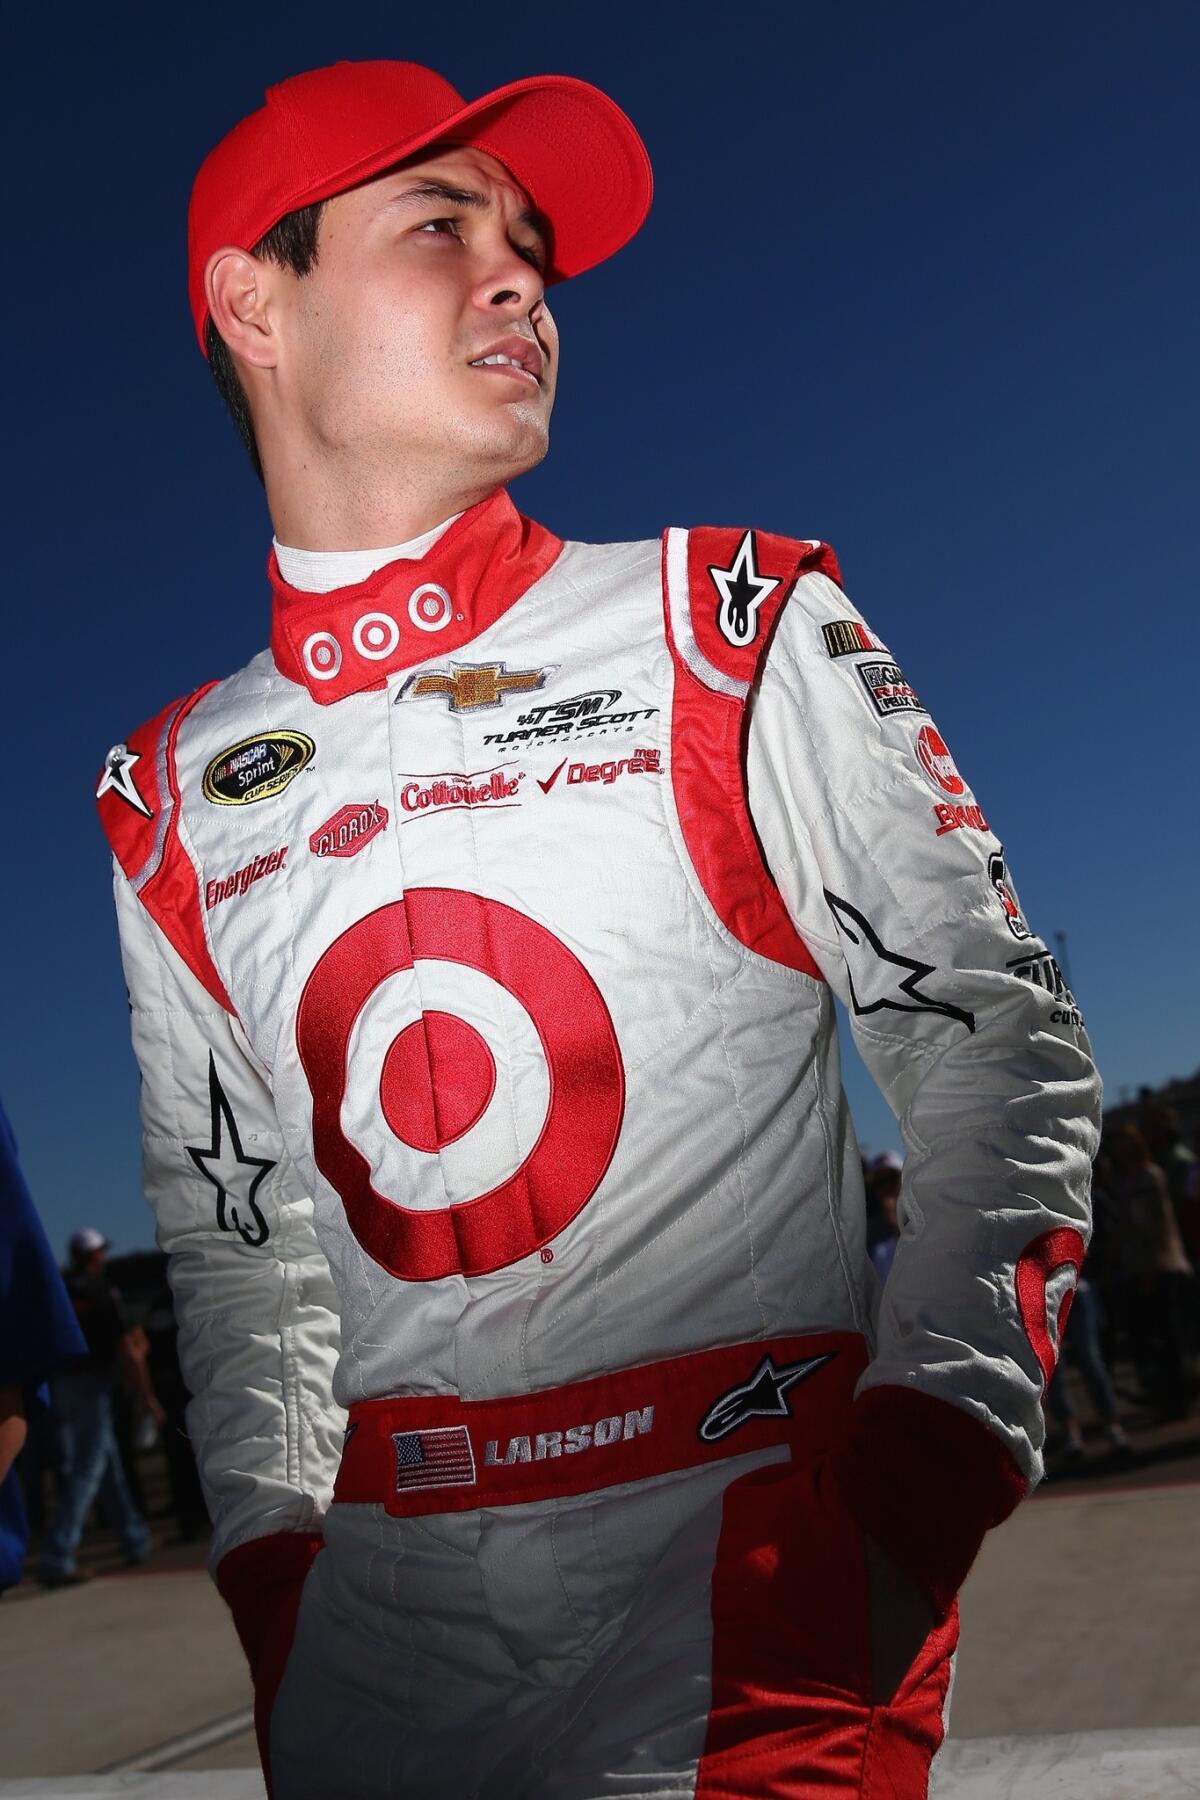 Defending Turkey Night Grand Prix champion Kyle Larson, who competed in the NASCAR Nationwide Series this past season, will be racing in Perris on Thanksgiving Night.